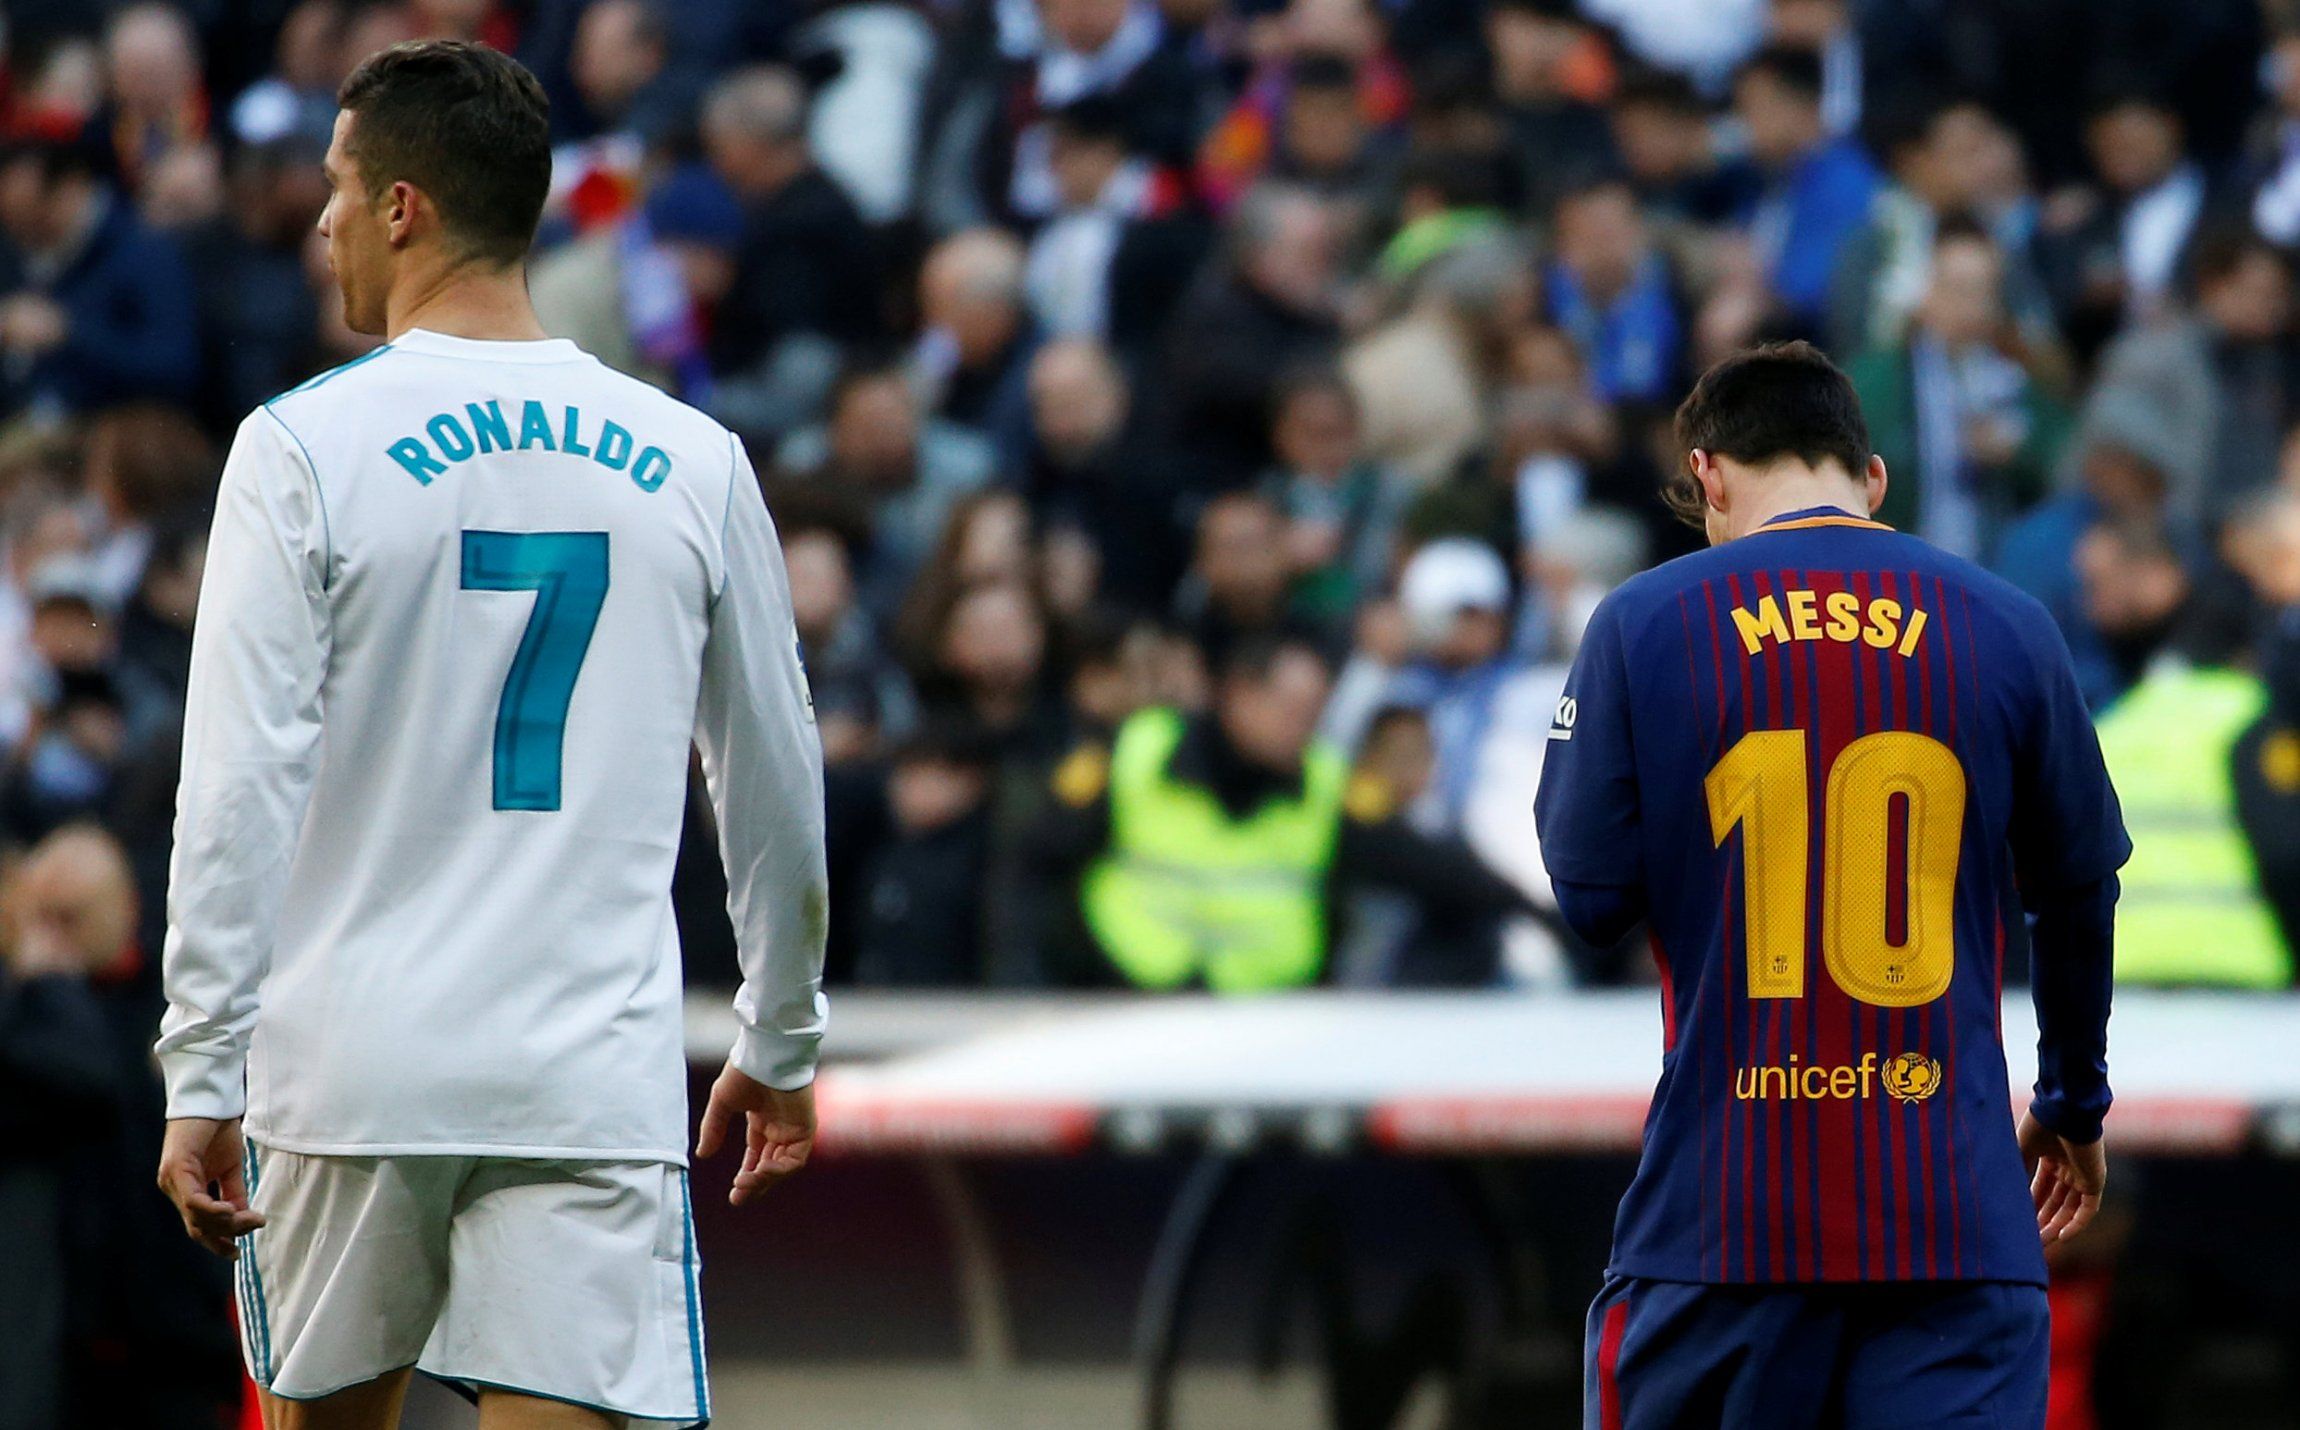 Cristiano Ronaldo and Lionel Messi side by side